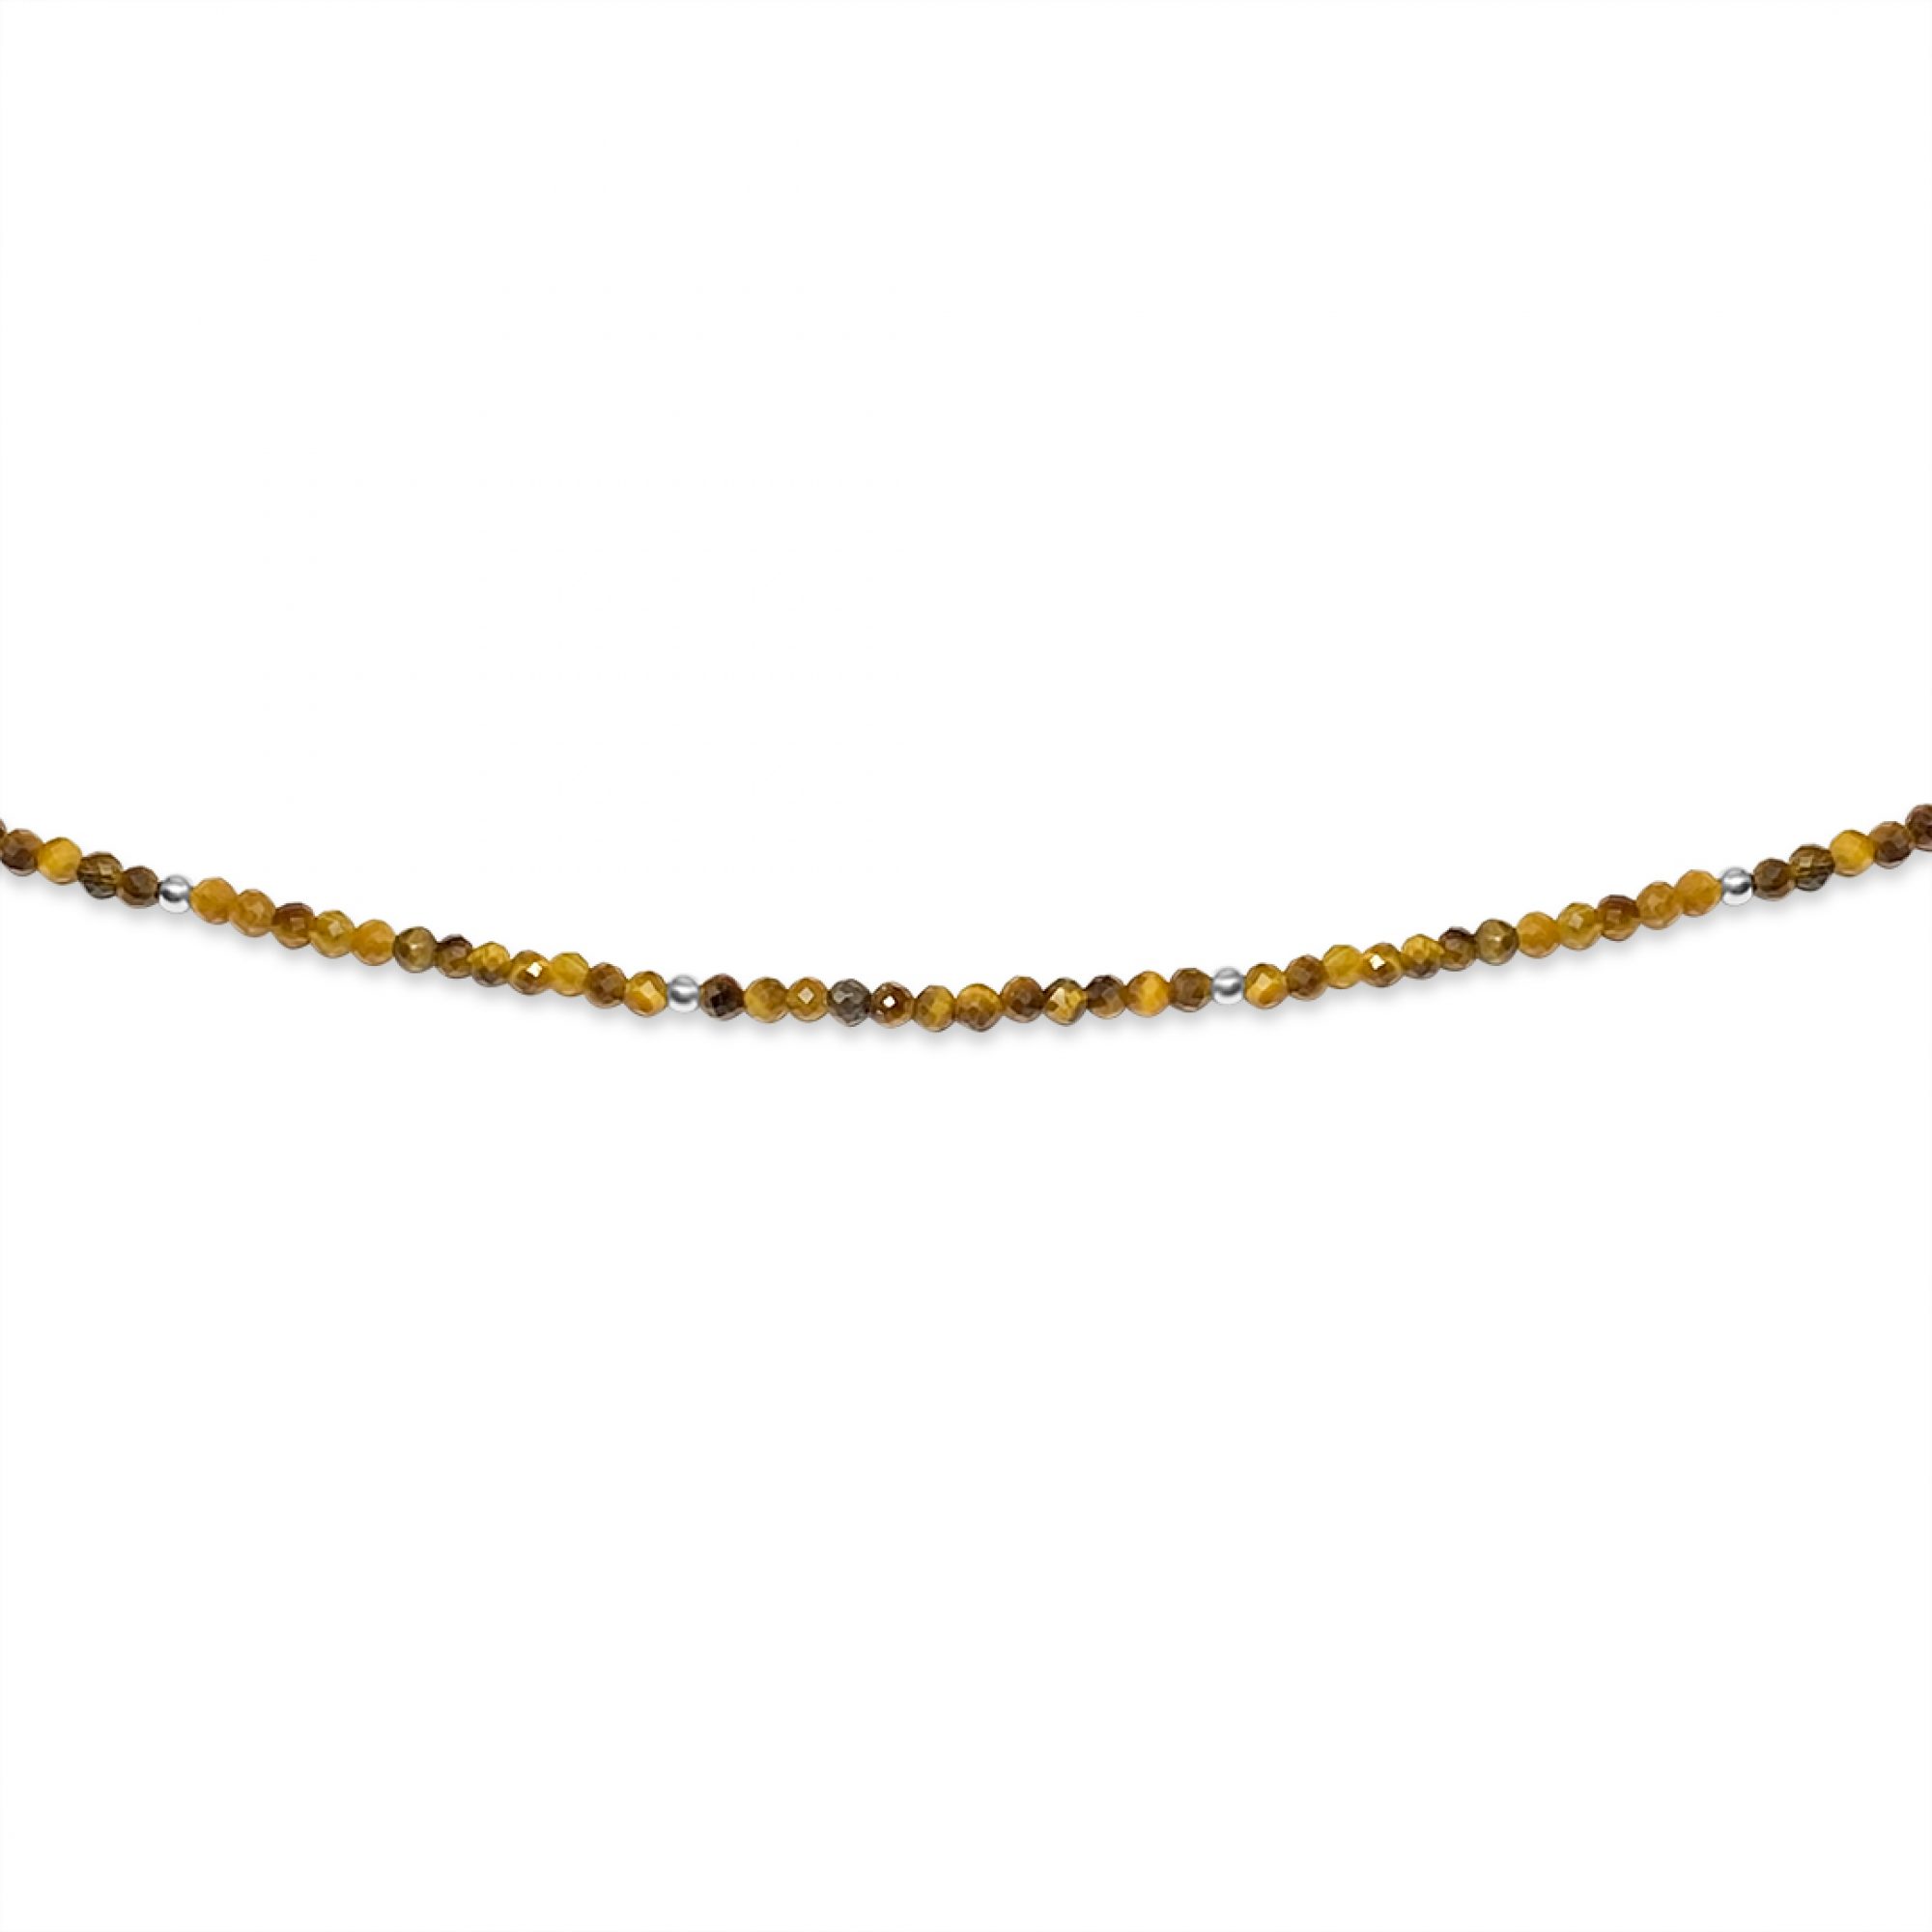 Anklet with eye of the tiger beads